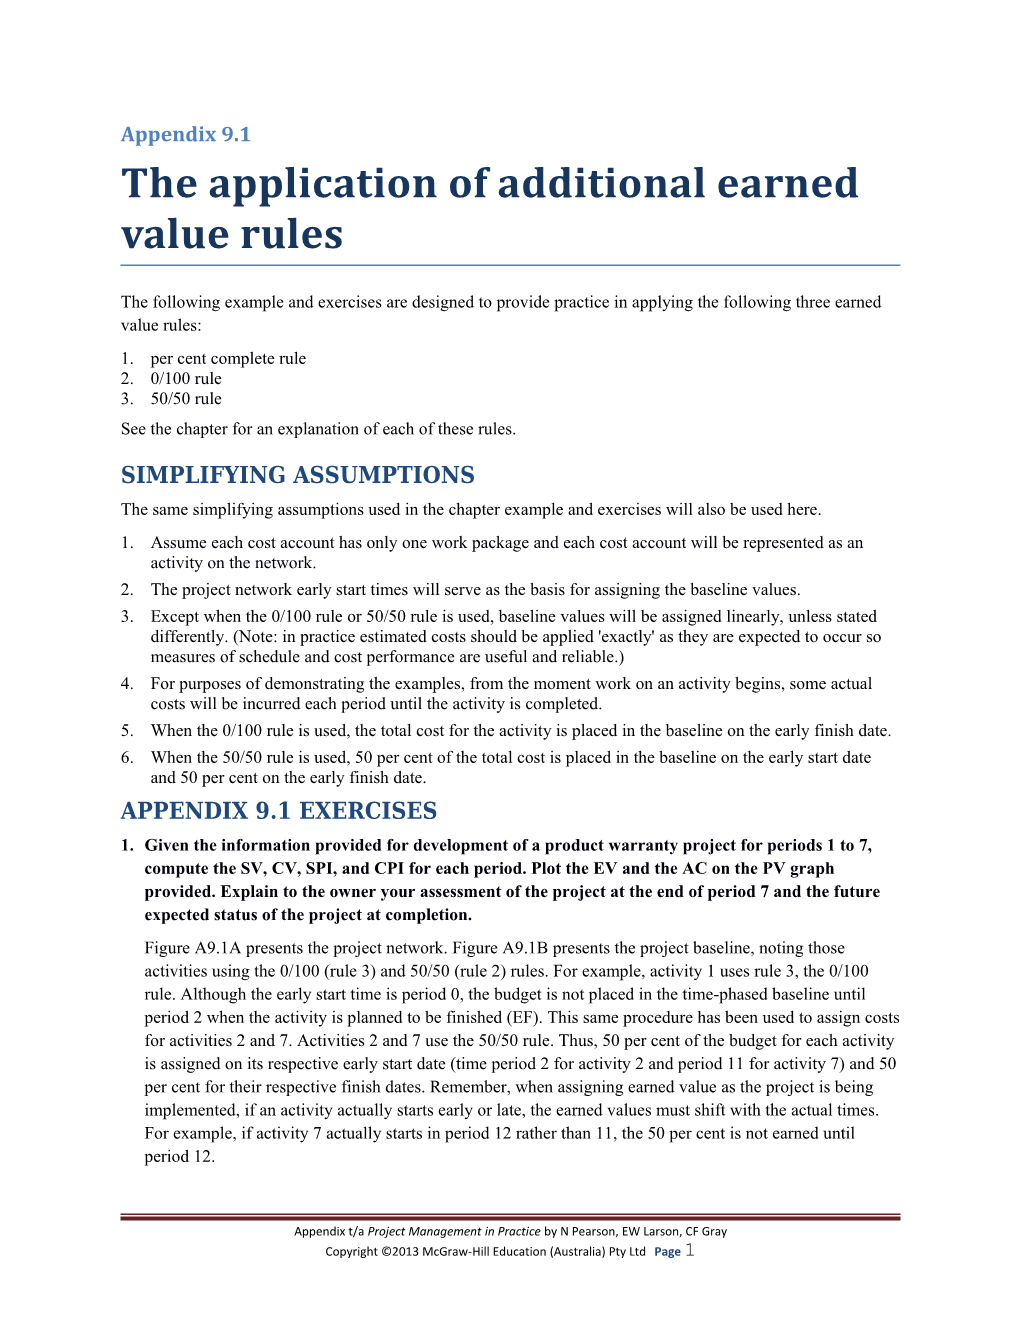 The Application of Additional Earned Value Rules